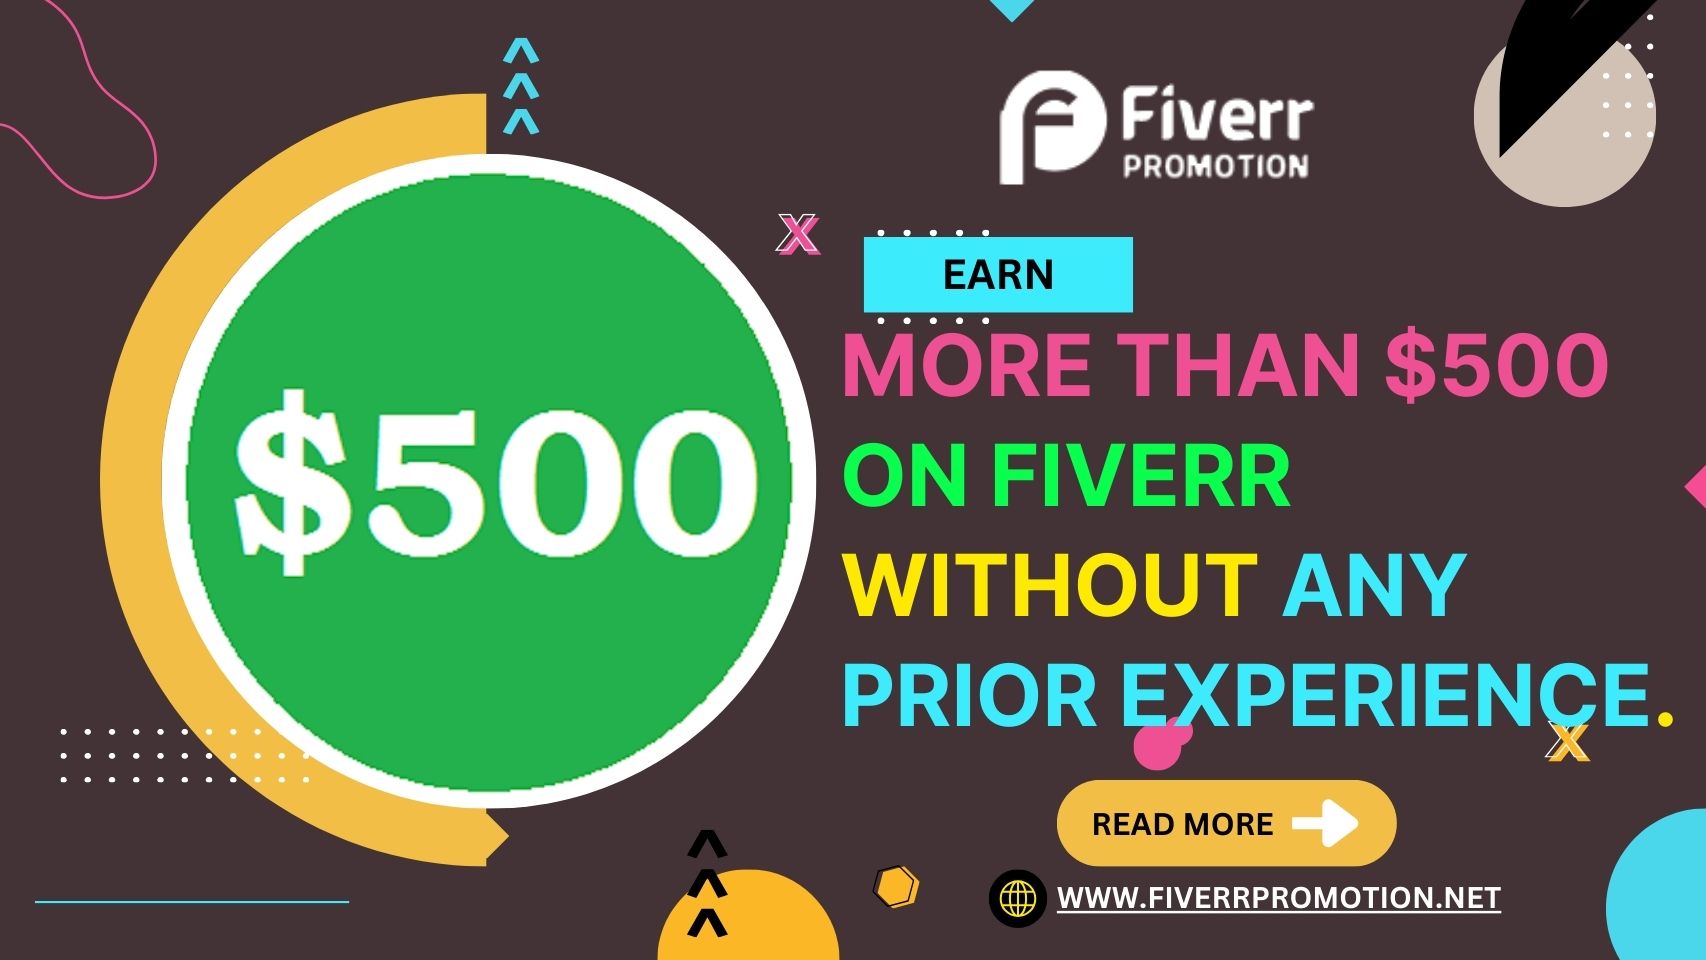 Earn More than $500 on Fiverr without any prior experience.